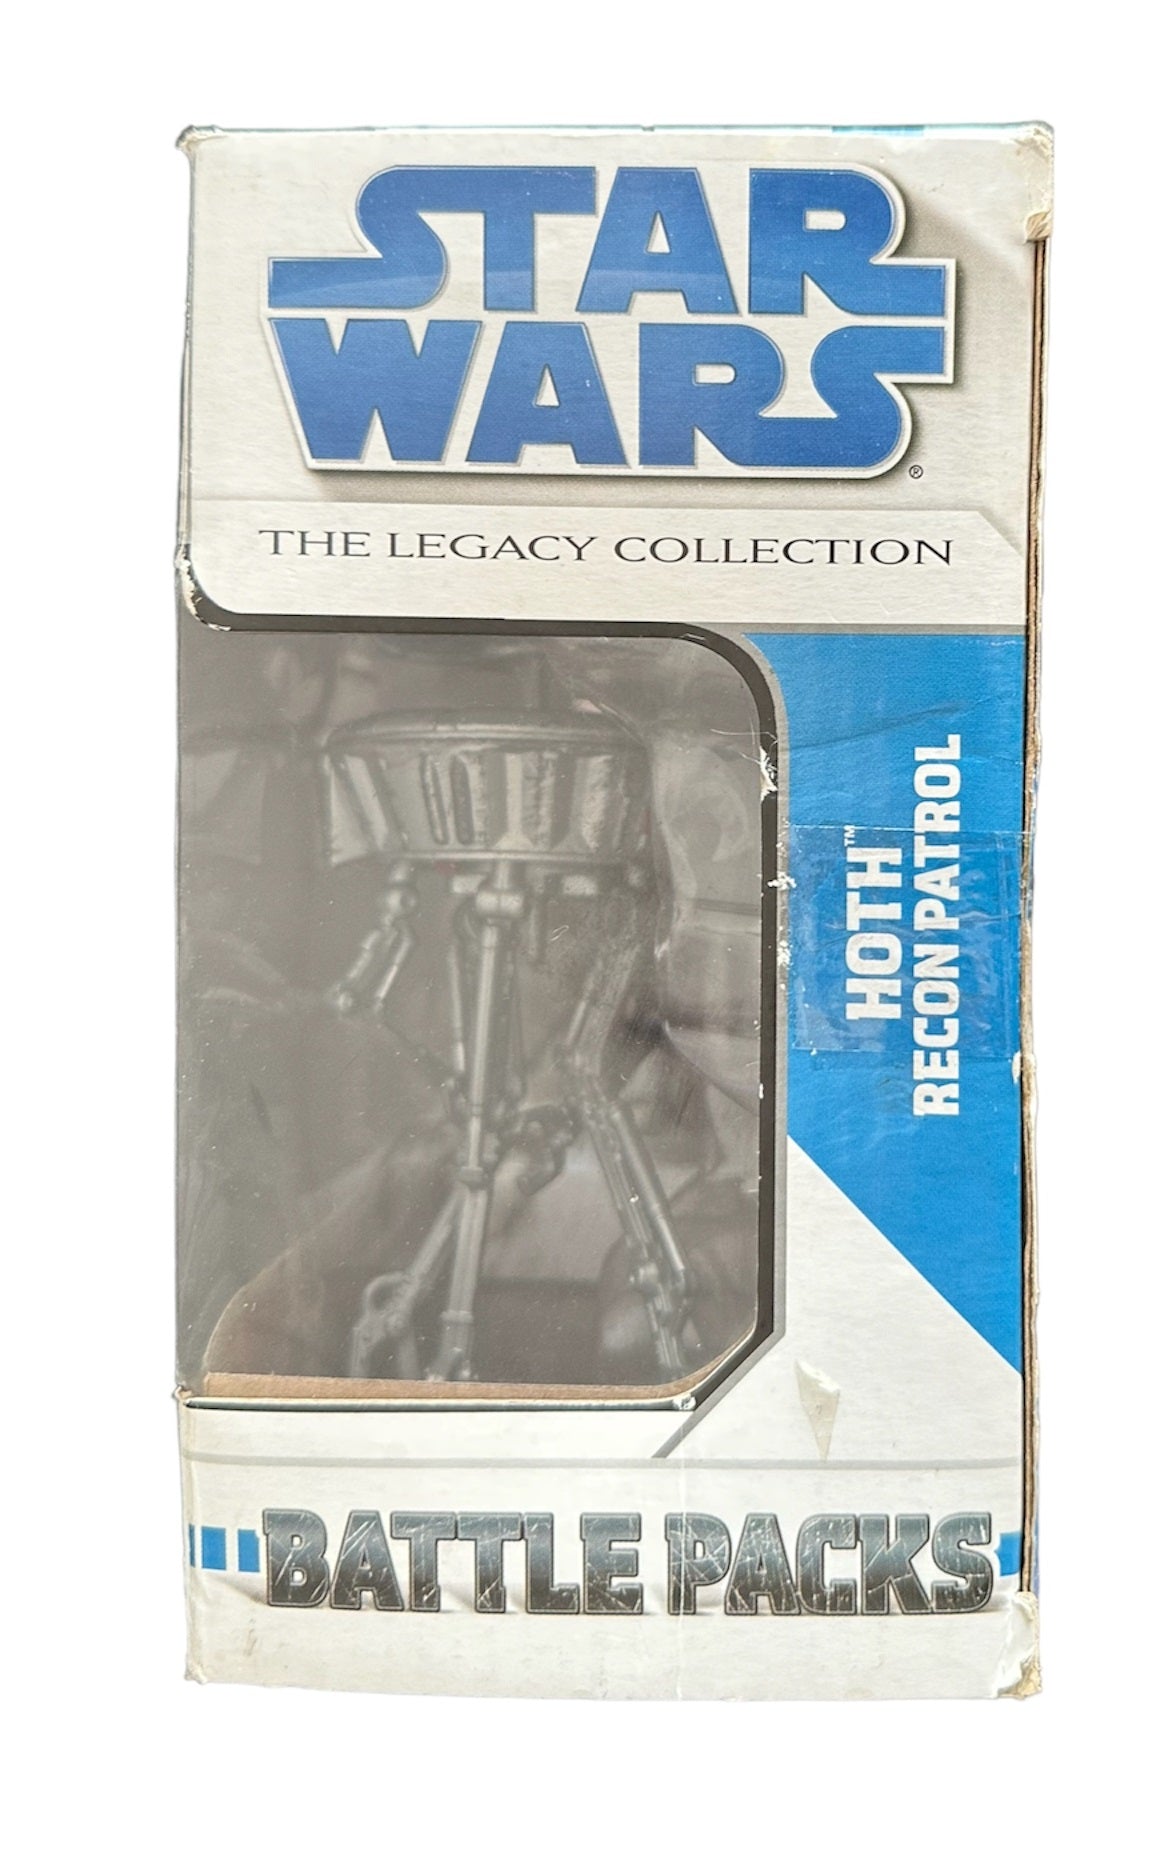 Vintage Star Wars 2008 The Legacy Collection - Battle Packs - Hoth Recon Patrol Action Figure 5 Pack - Brand New Factory Sealed Shop Stock Room Find